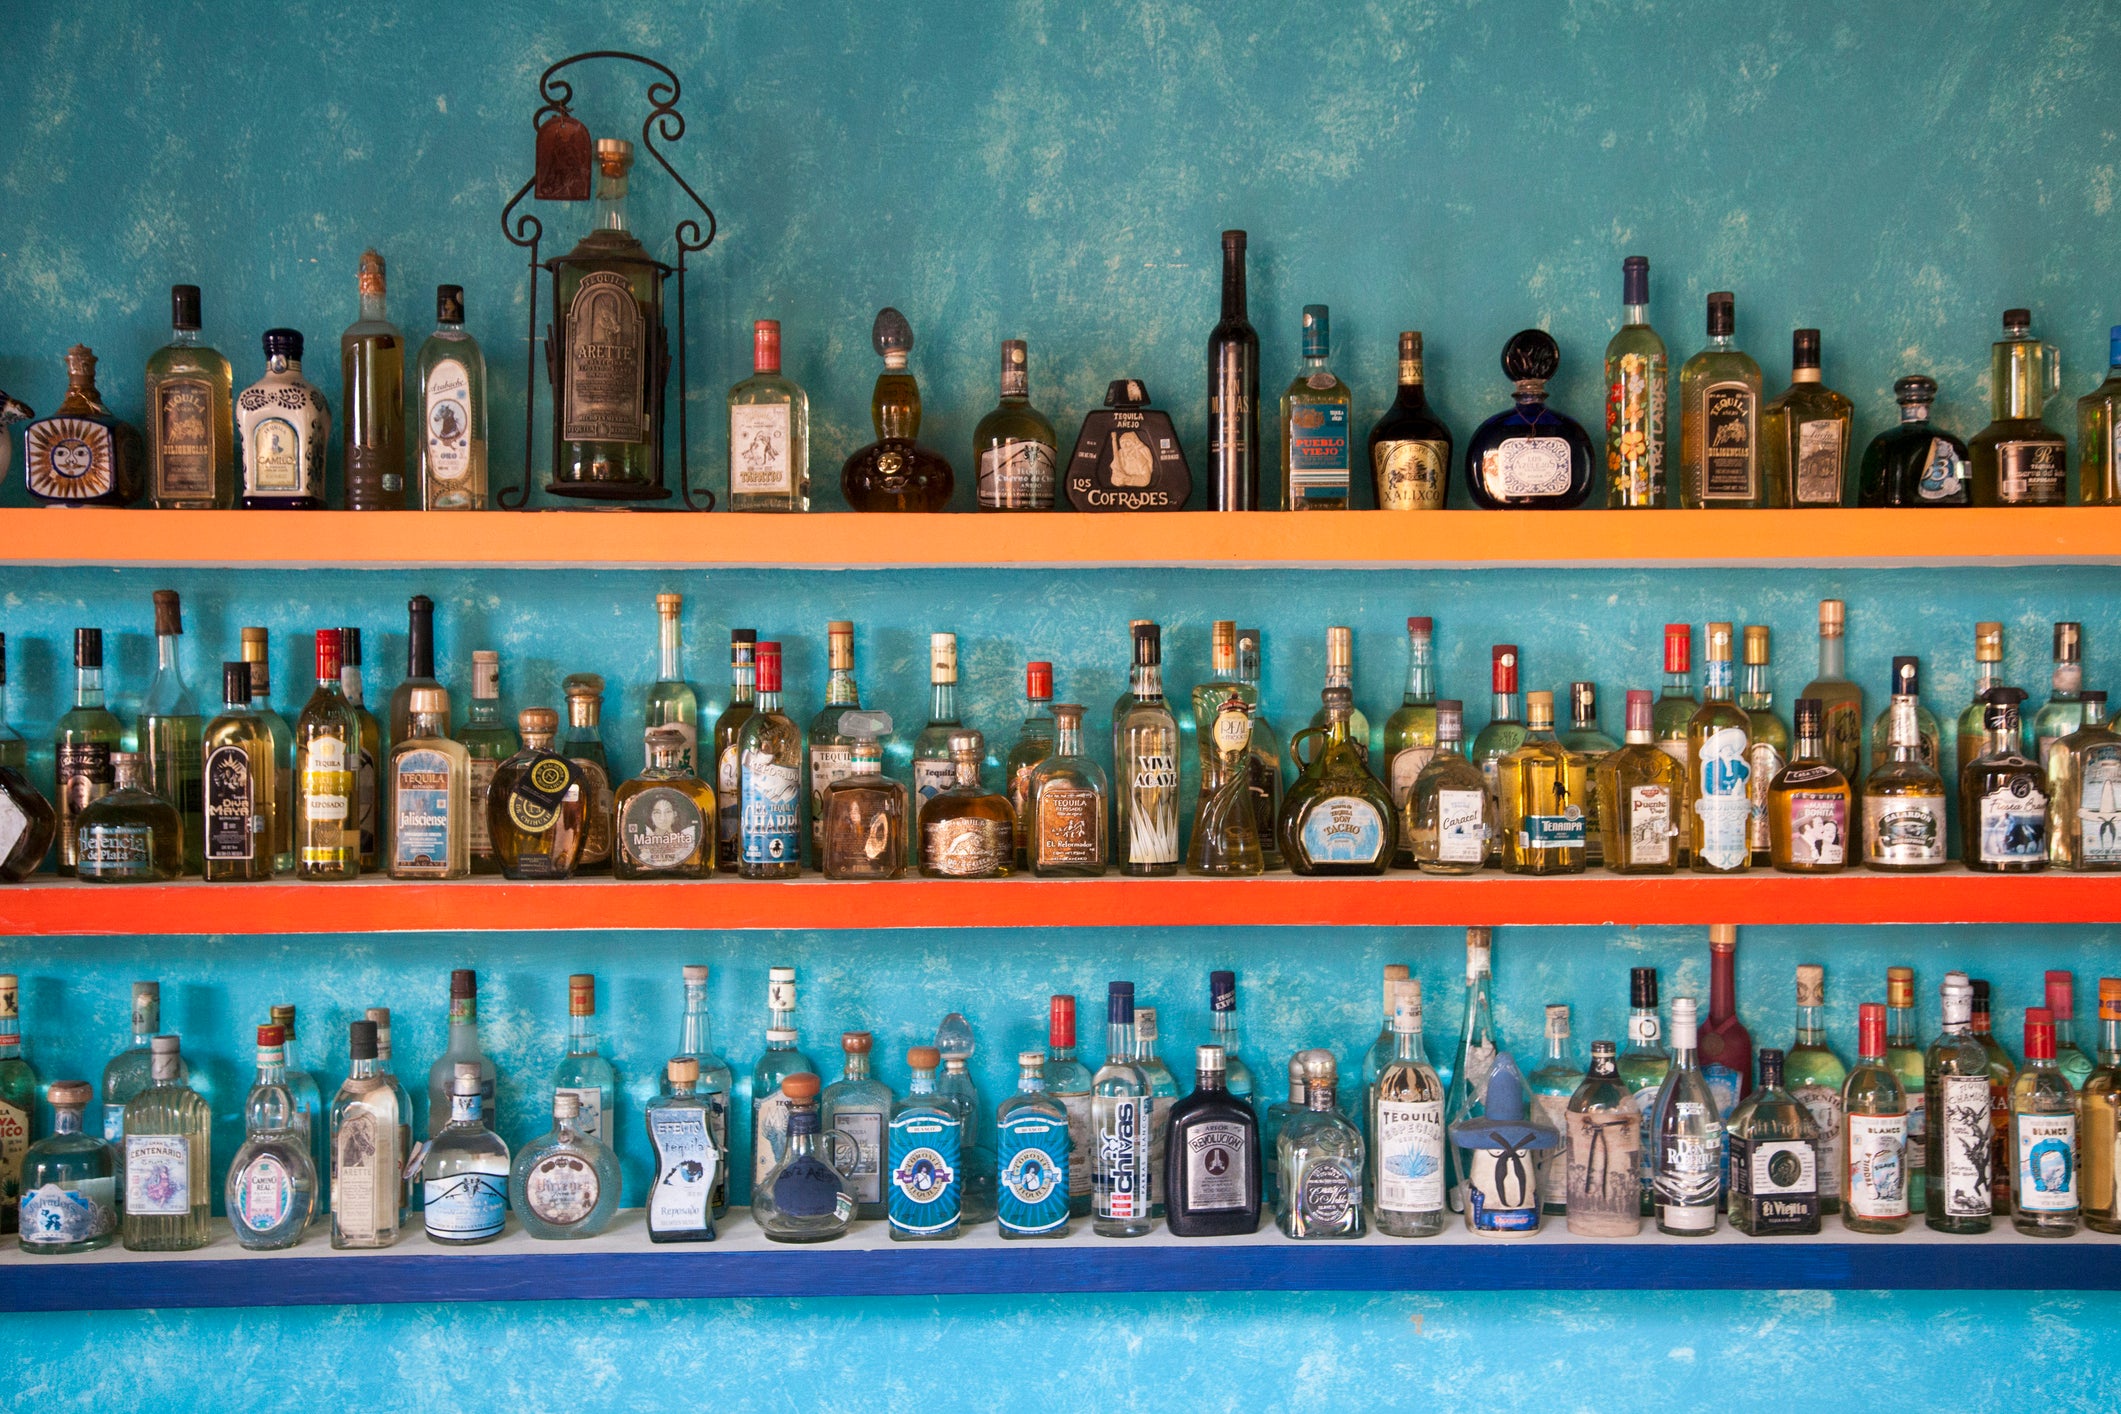 It’s Not Tulum Or Cancun, But Tequila Should Be Your Next Stop In Mexico